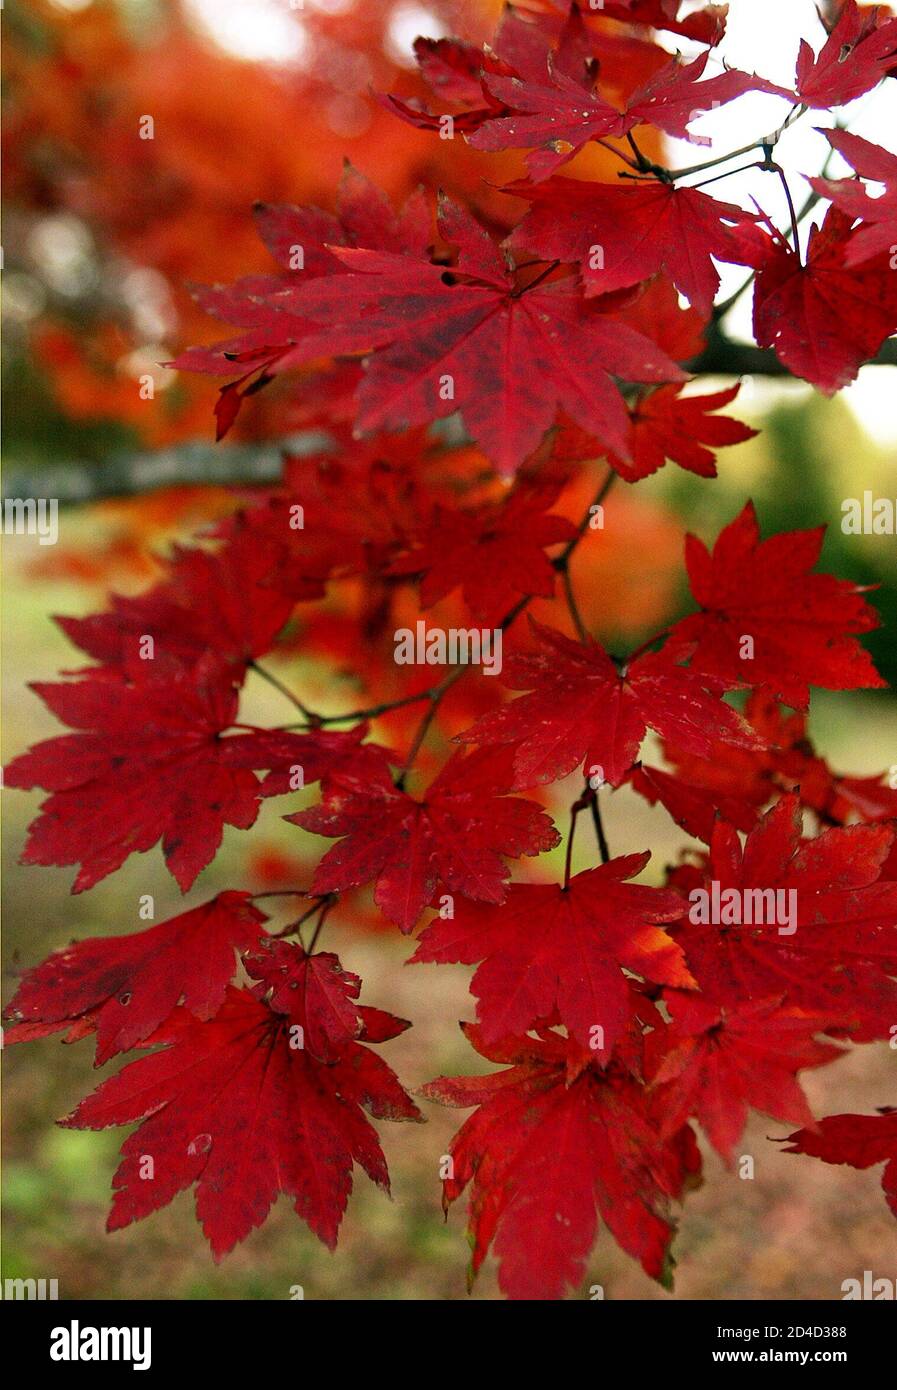 Japanese maple leaves colour the autumn countryside in Tsumagoi village, north of Tokyo October 25, 2003. Many Japanese are flocking to mountainous areas to enjoy viewing the scarlet maple leaves in their autumnal tints, now at their peak. Stock Photo